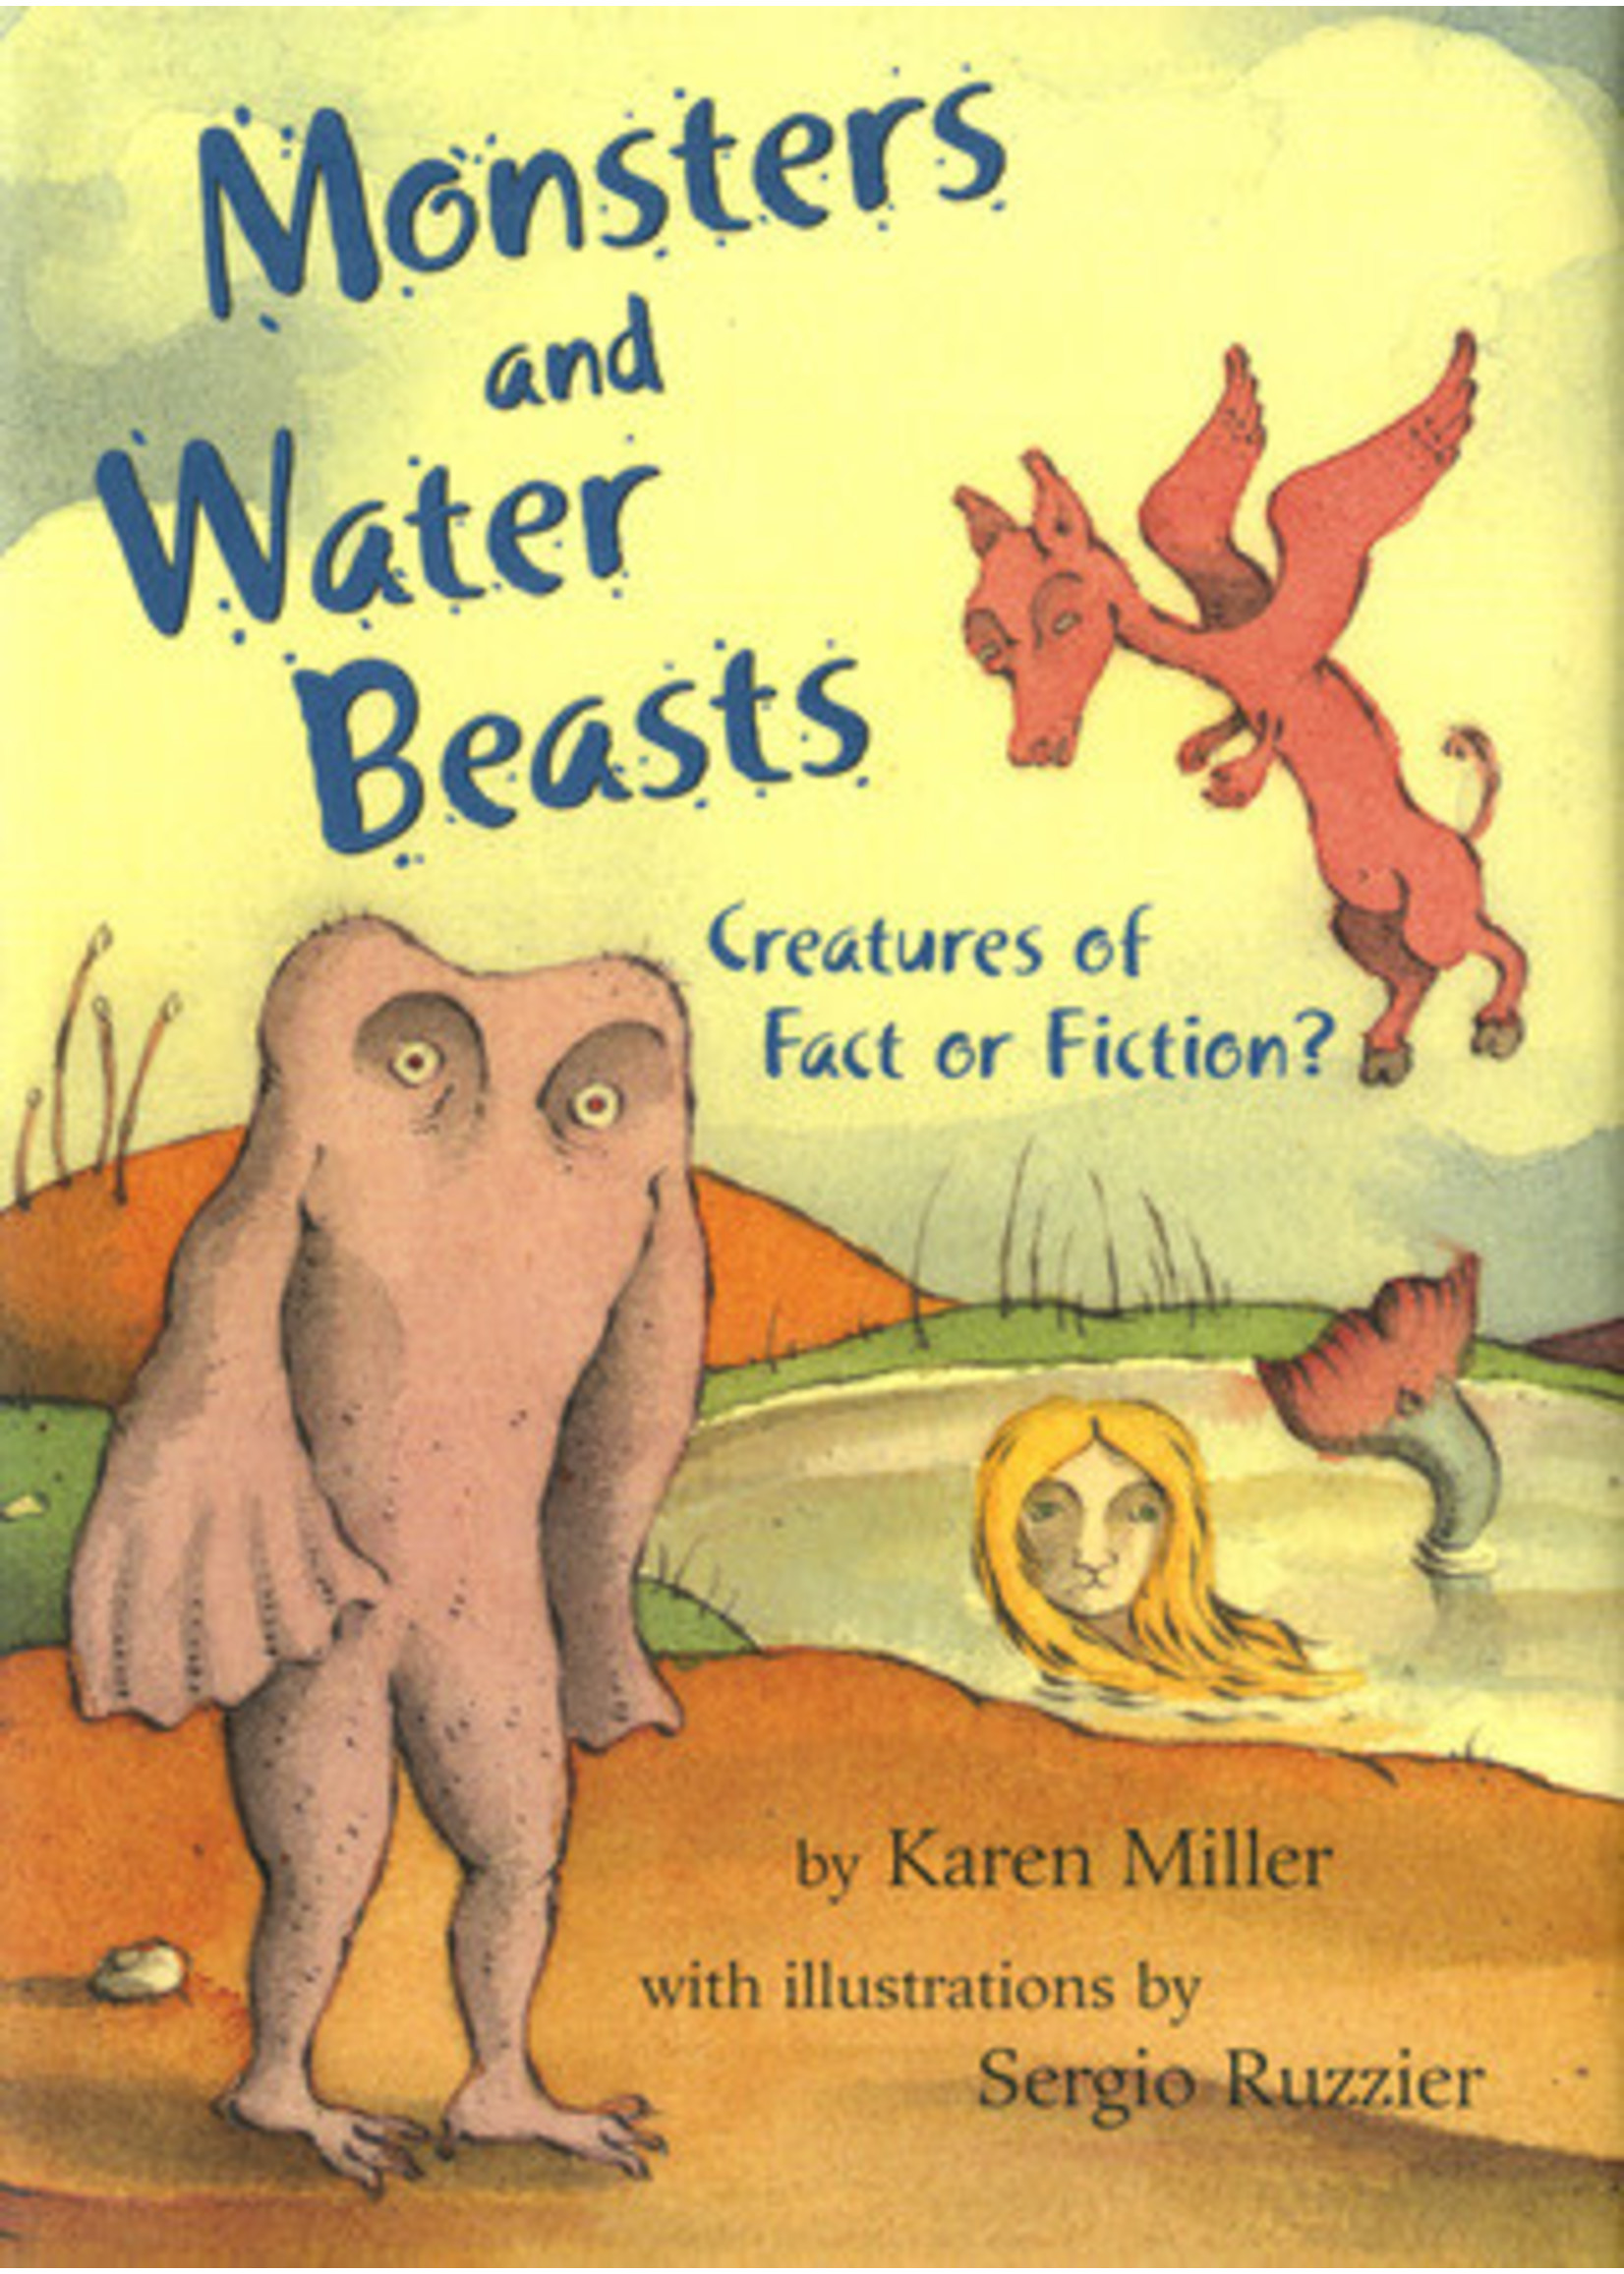 Monsters and Water Beasts: Creatures of Fact or Fiction? by Karen Miller